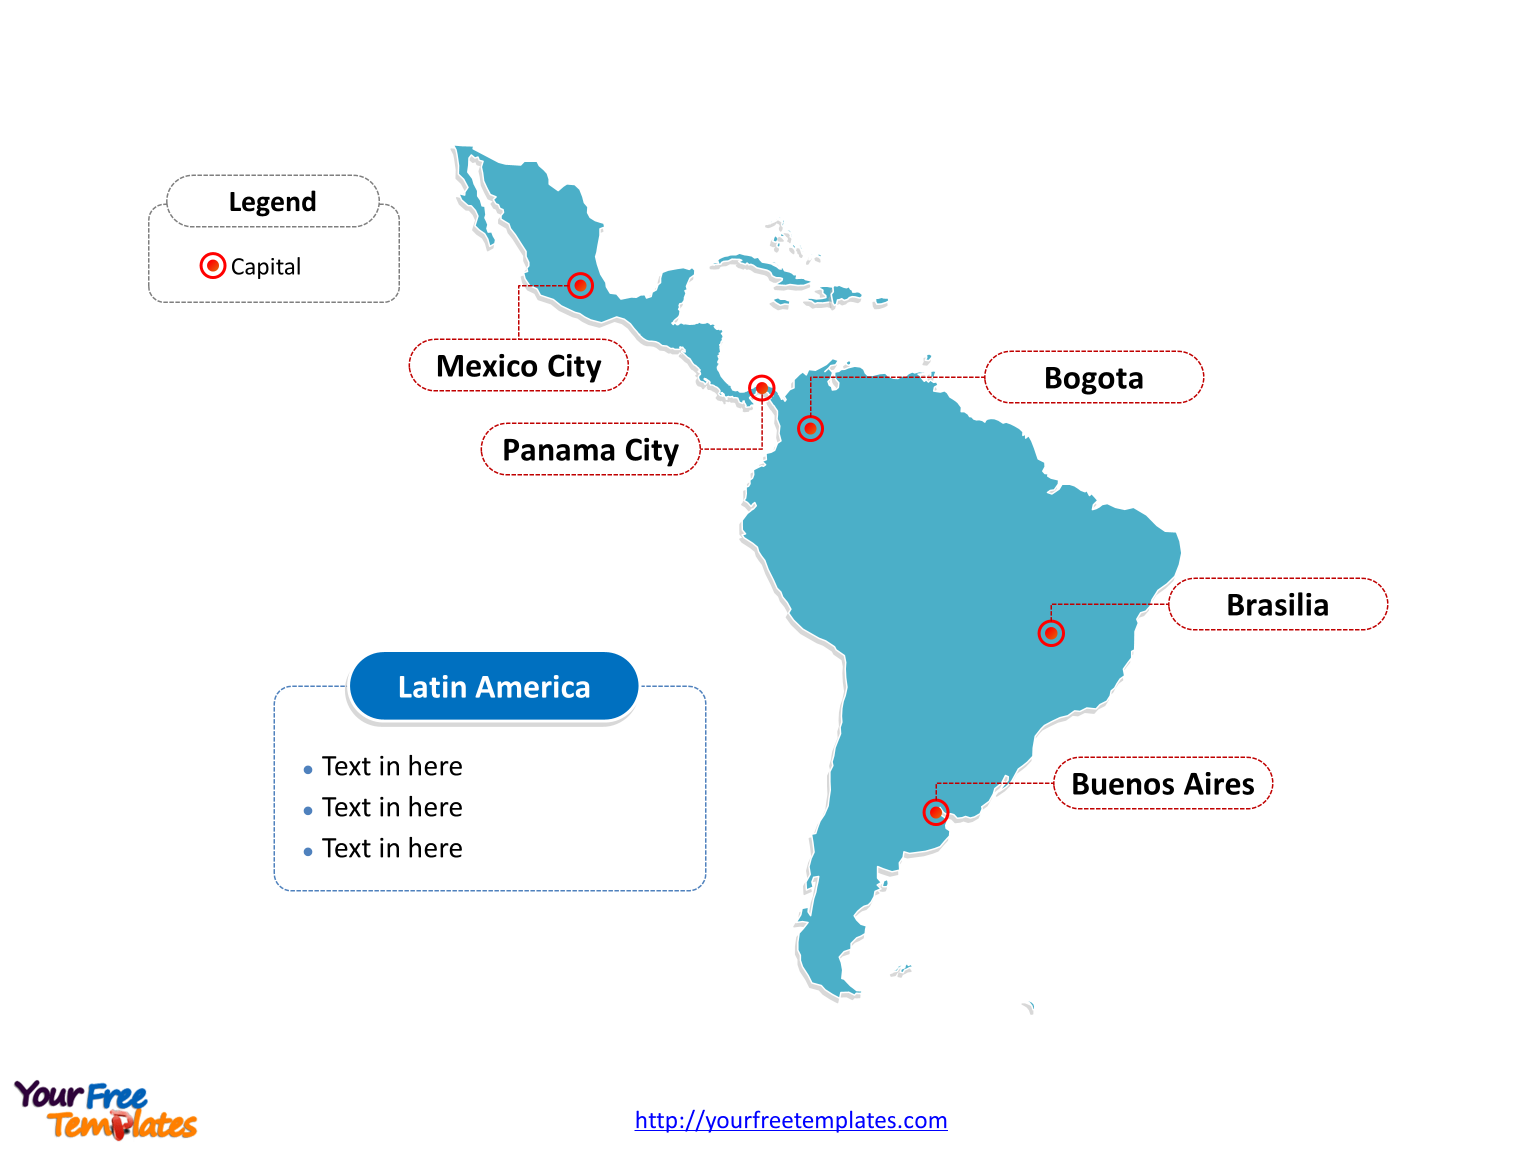 Map of Latin America with outline and cities labeled on the Blank Latin America map free templates